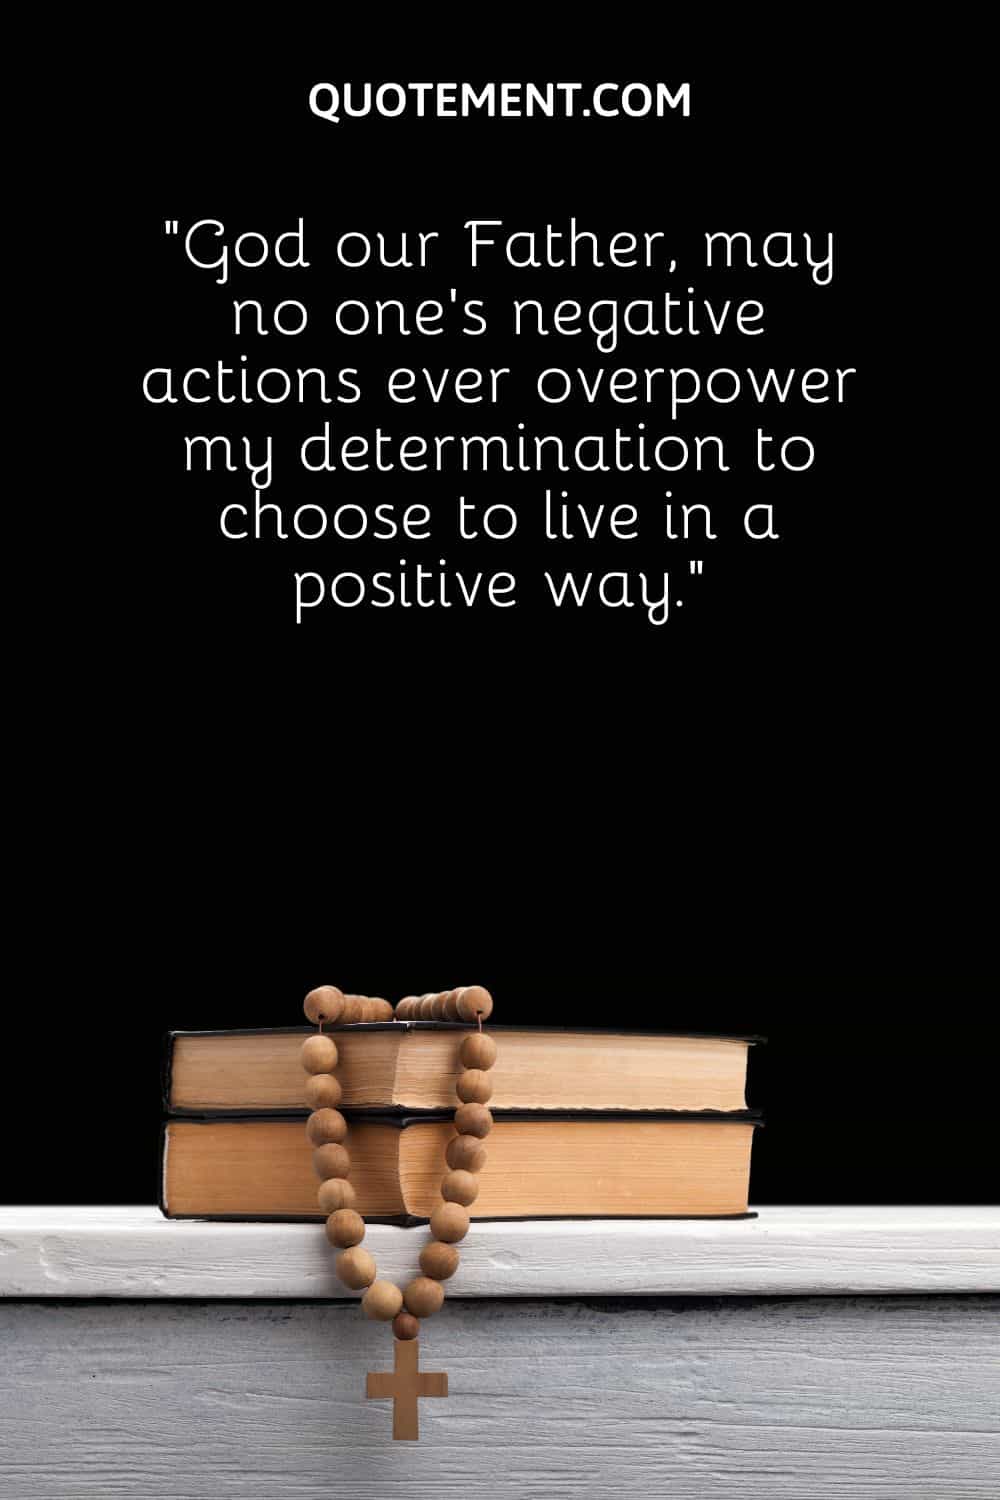 may no one’s negative actions ever overpower my determination to choose to live in a positive way.